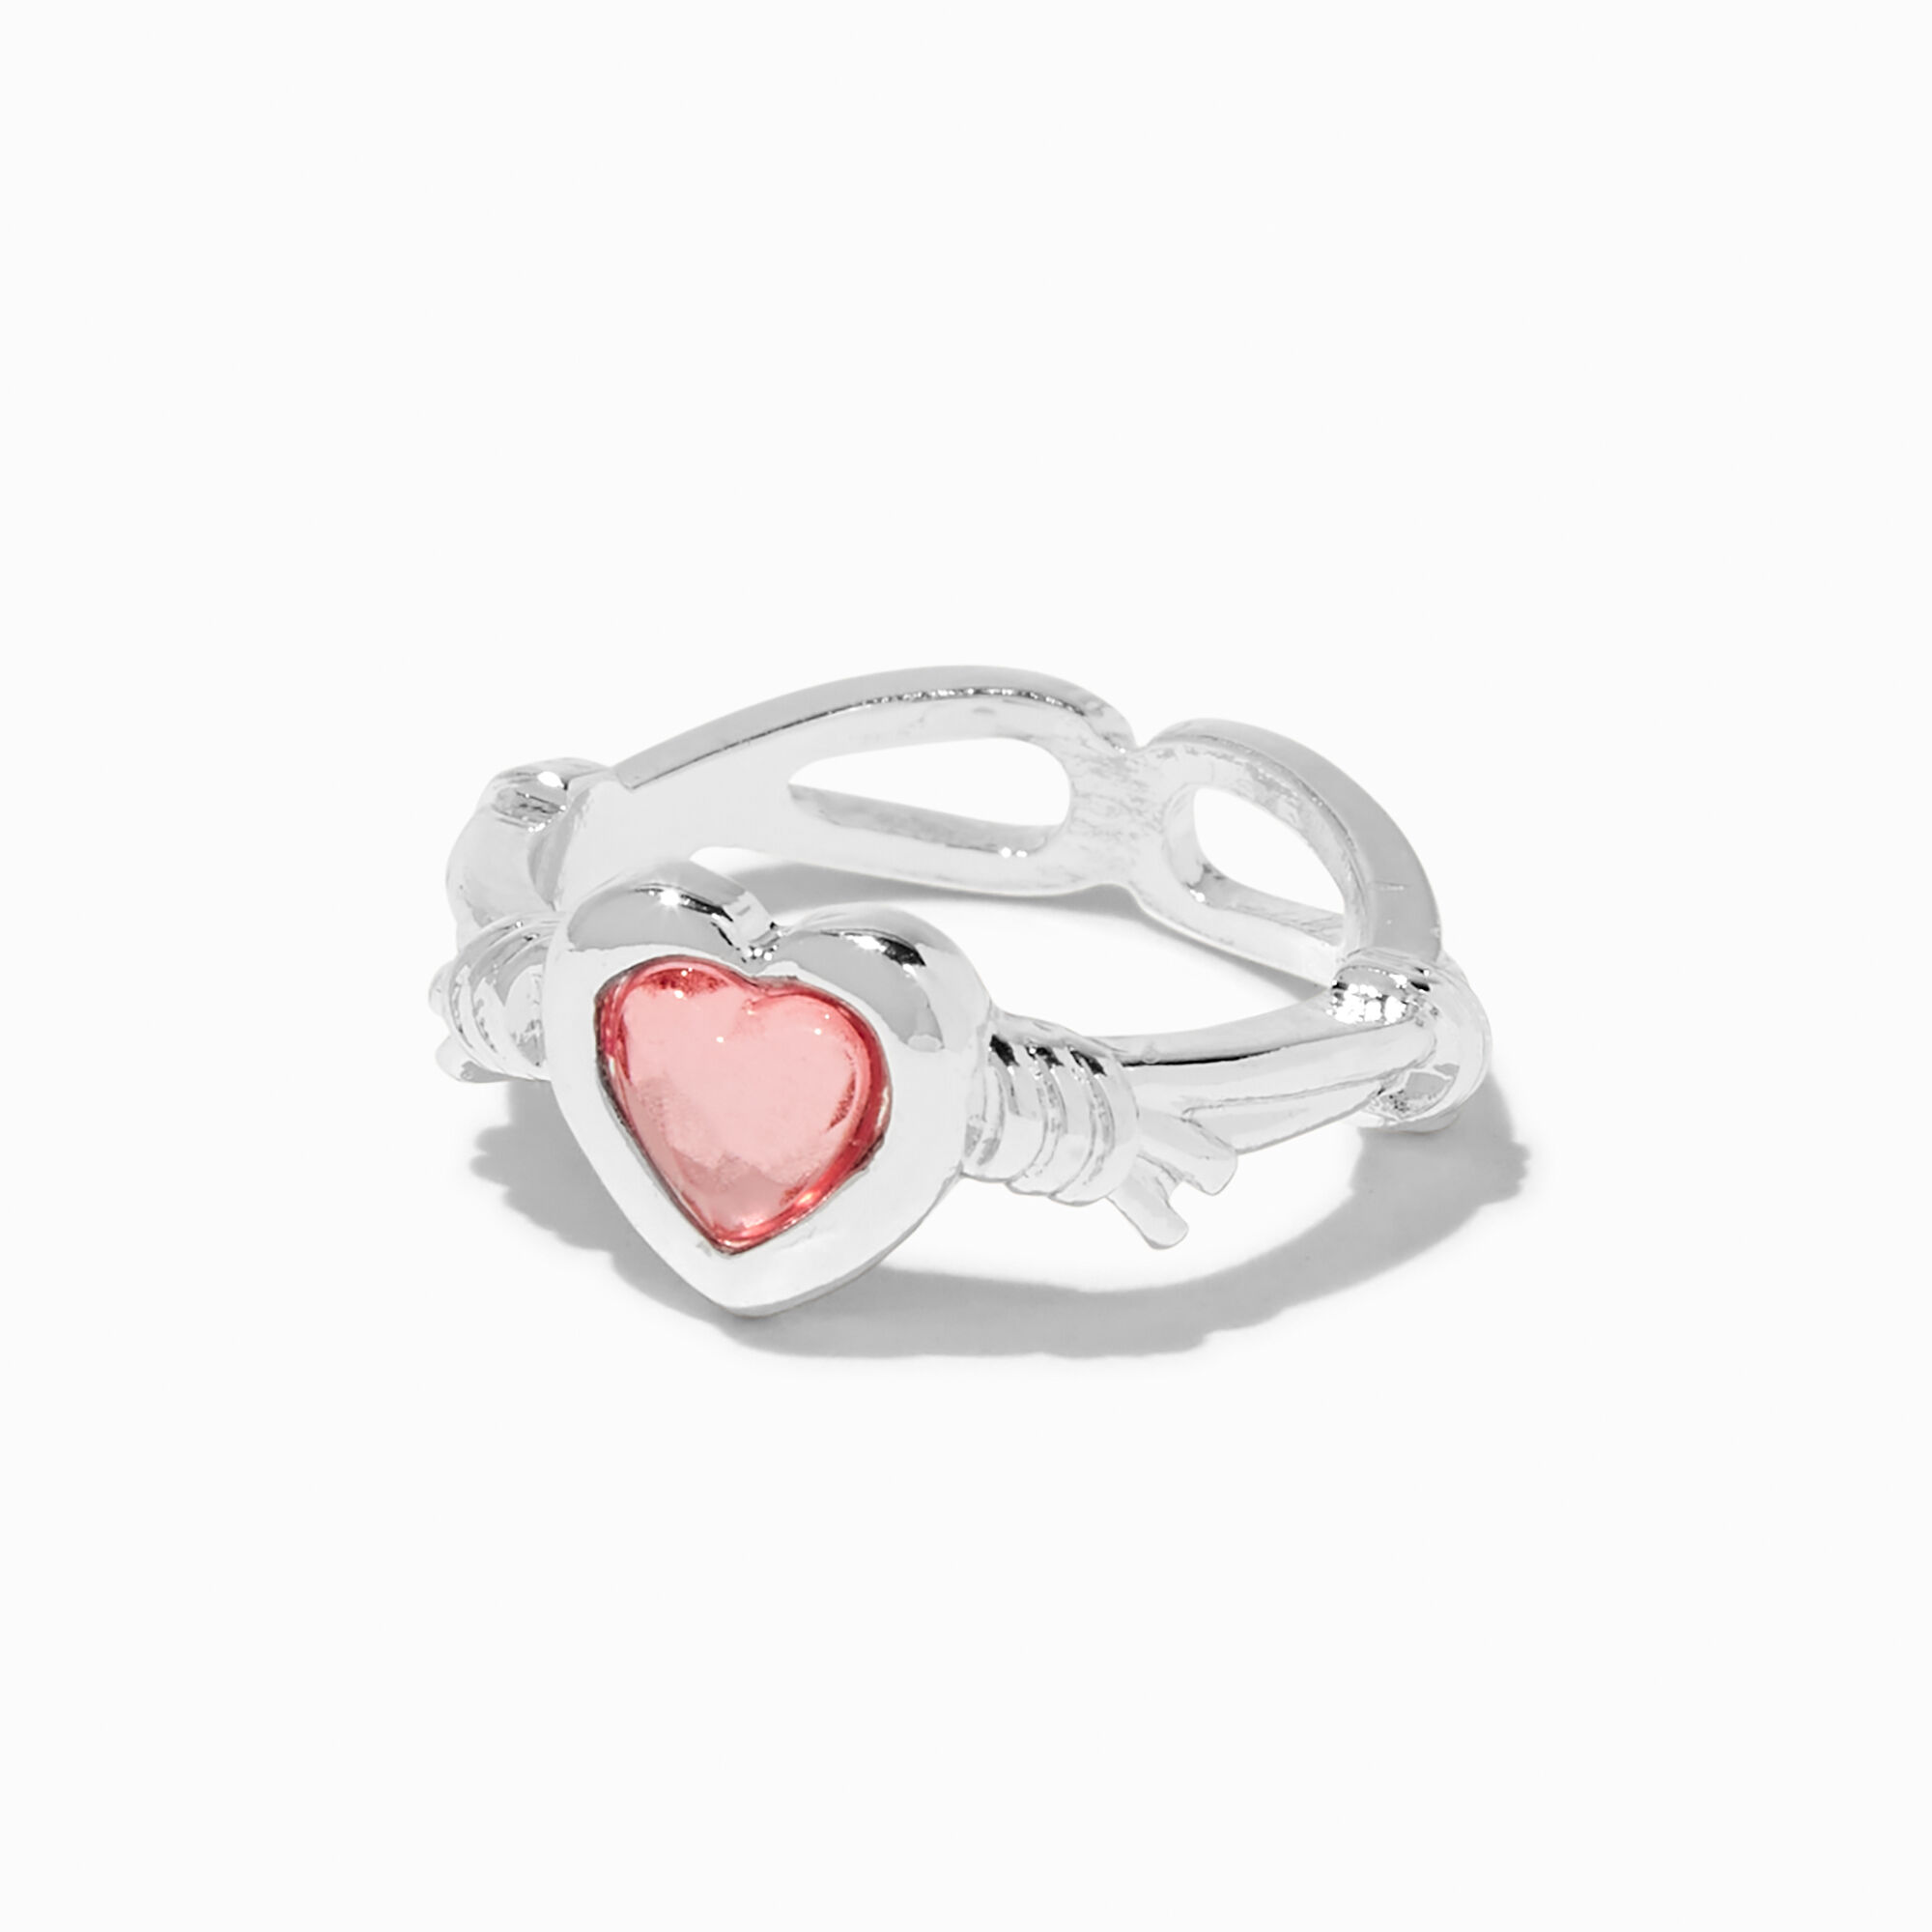 View Claires Heart SilverTone Barbed Wire Ring Pink information